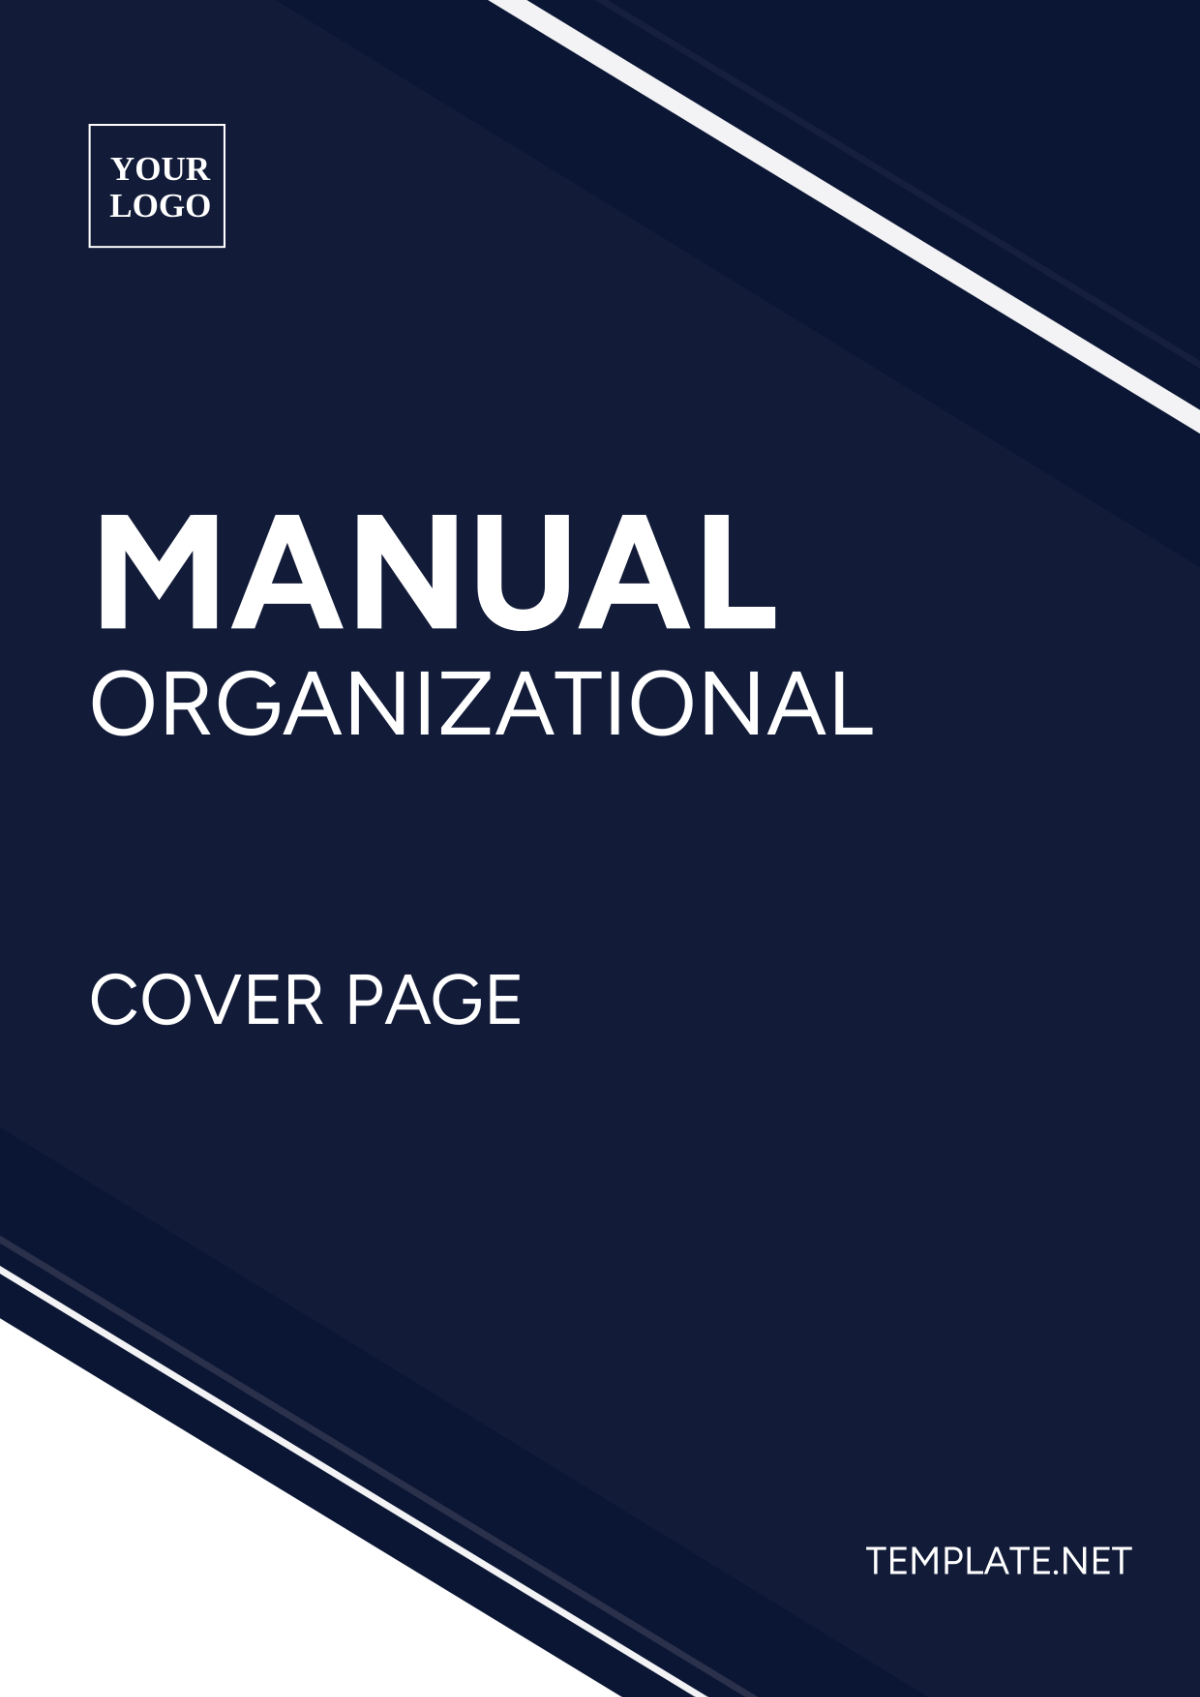 Manual Organizational Cover Page Template